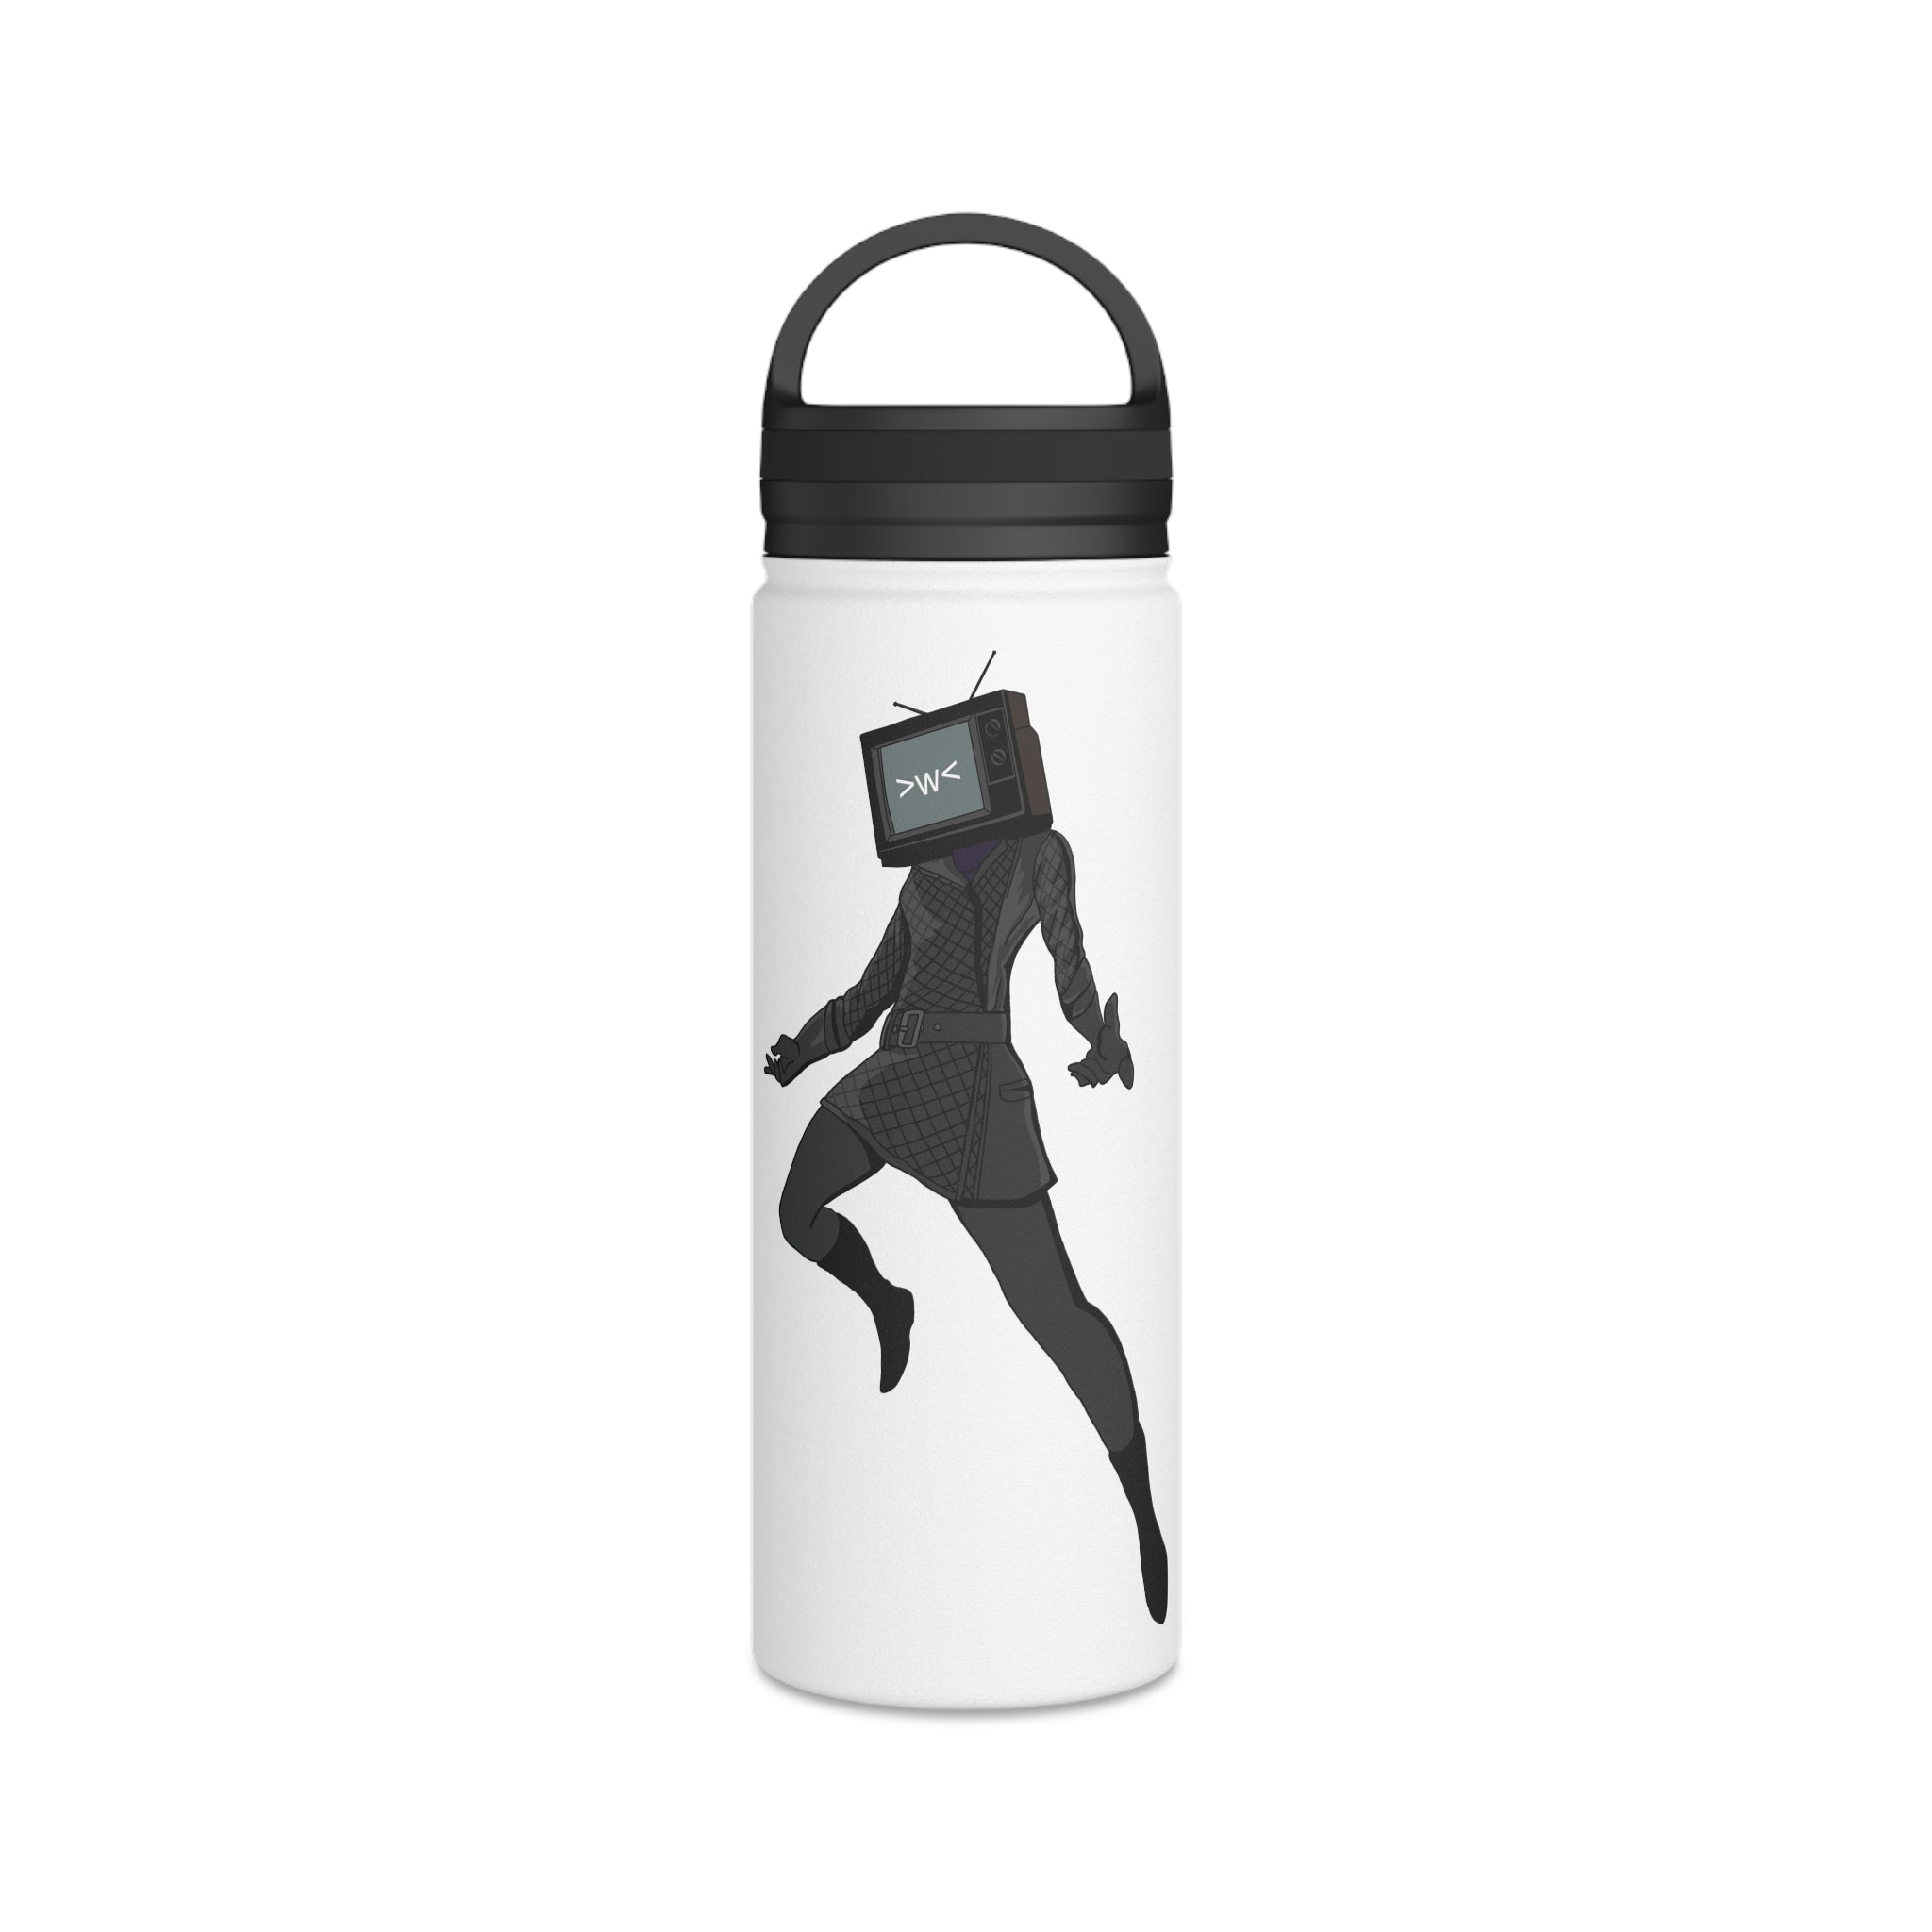 Water bottle featuring jumping TV Woman illustration on white wate bottle